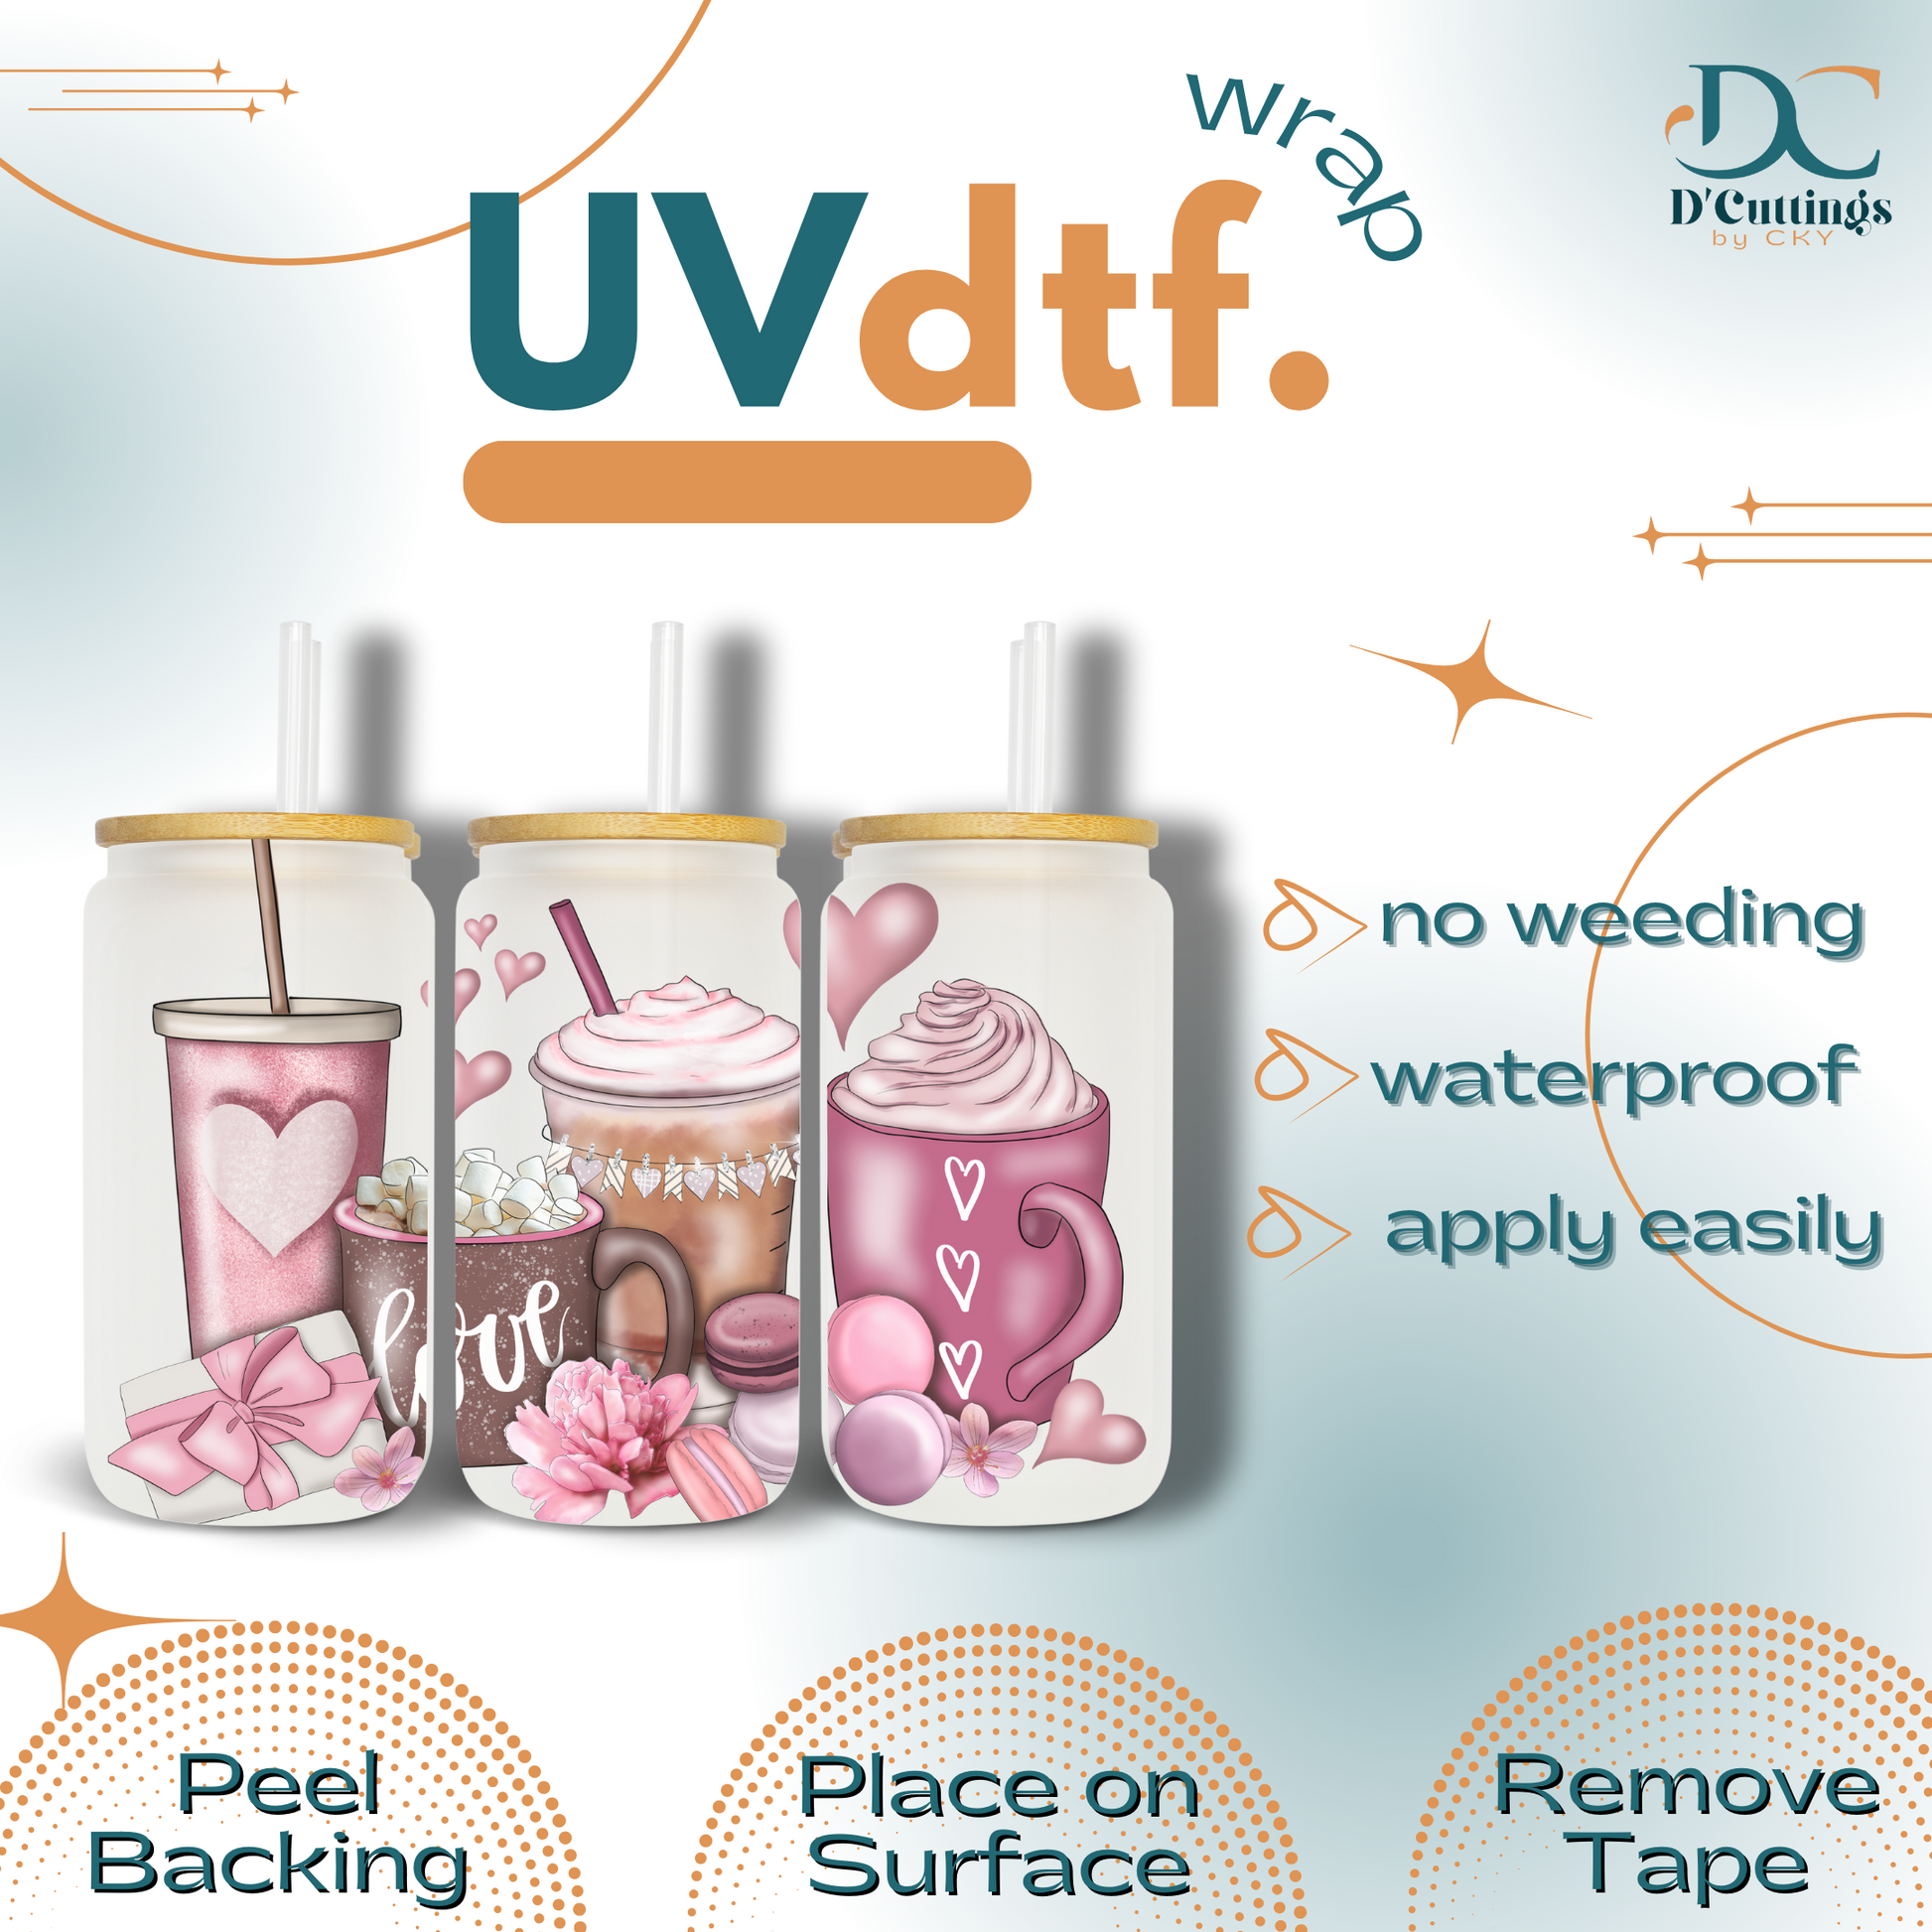 Love Valentines UV DTF Cup Wrap For Glass Can, Ready to Apply and Ready to  Ship